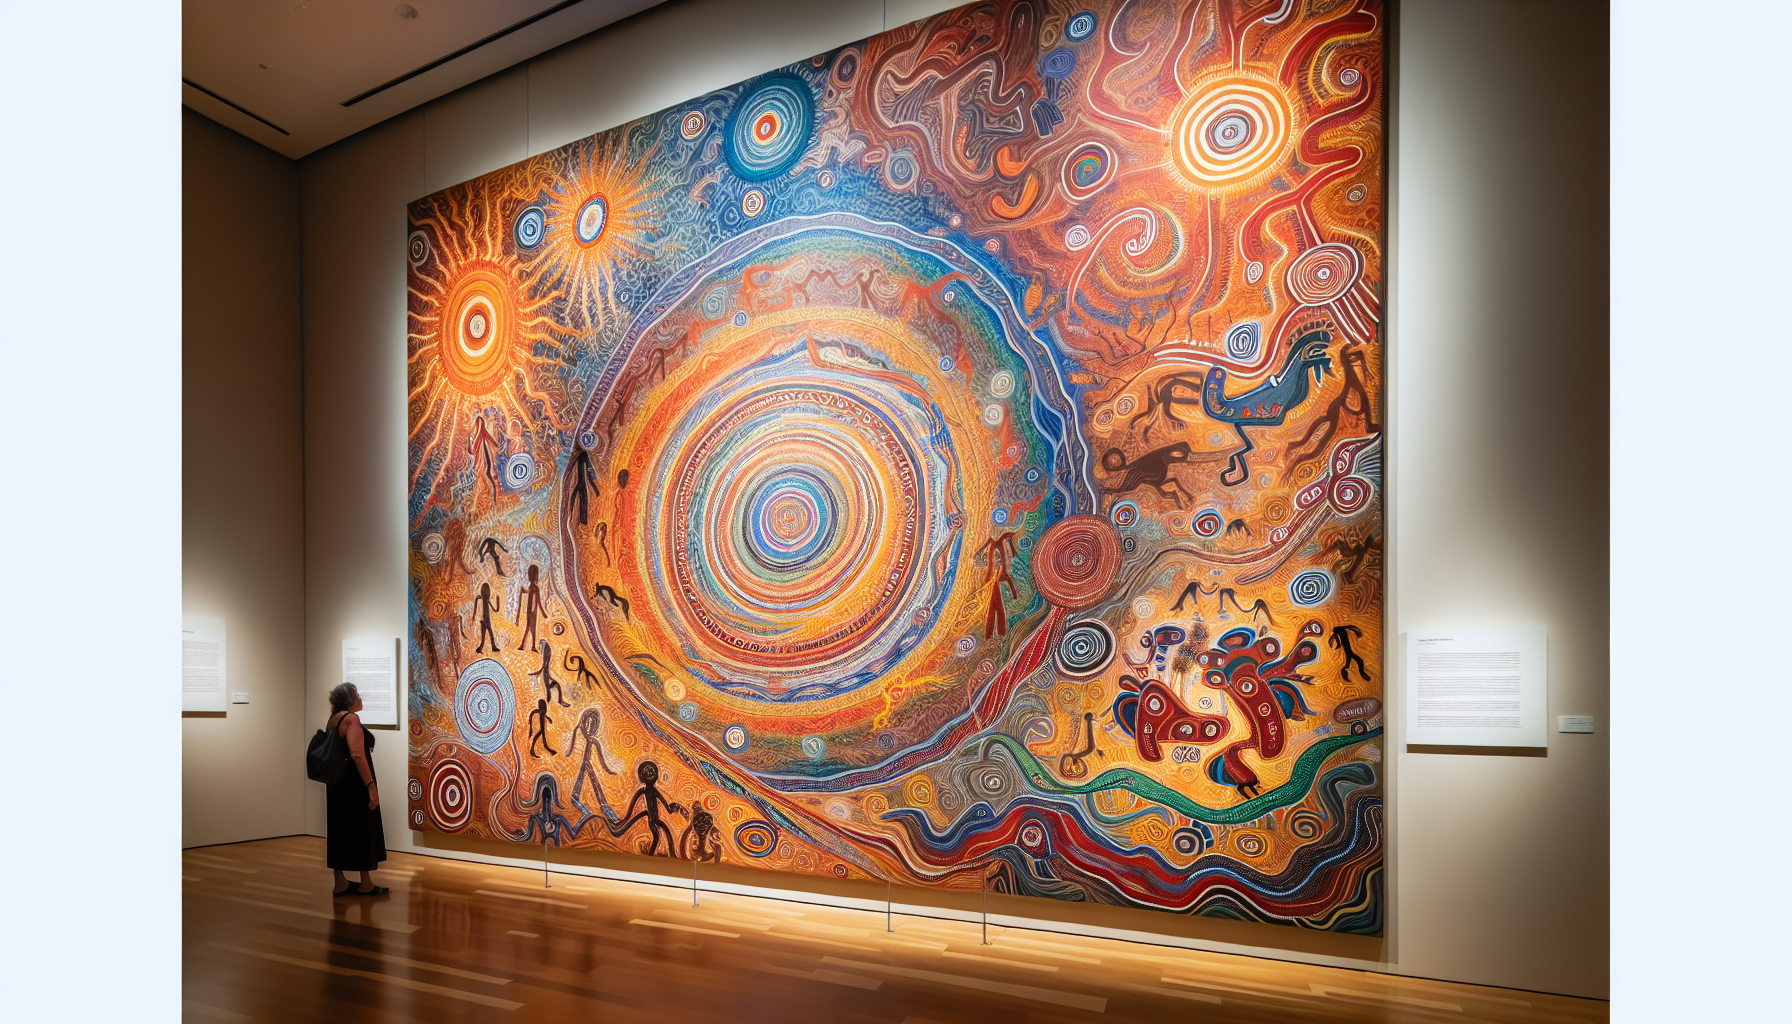 Indigenous art exhibition at the National Museum of Australia depicting rich cultural heritage